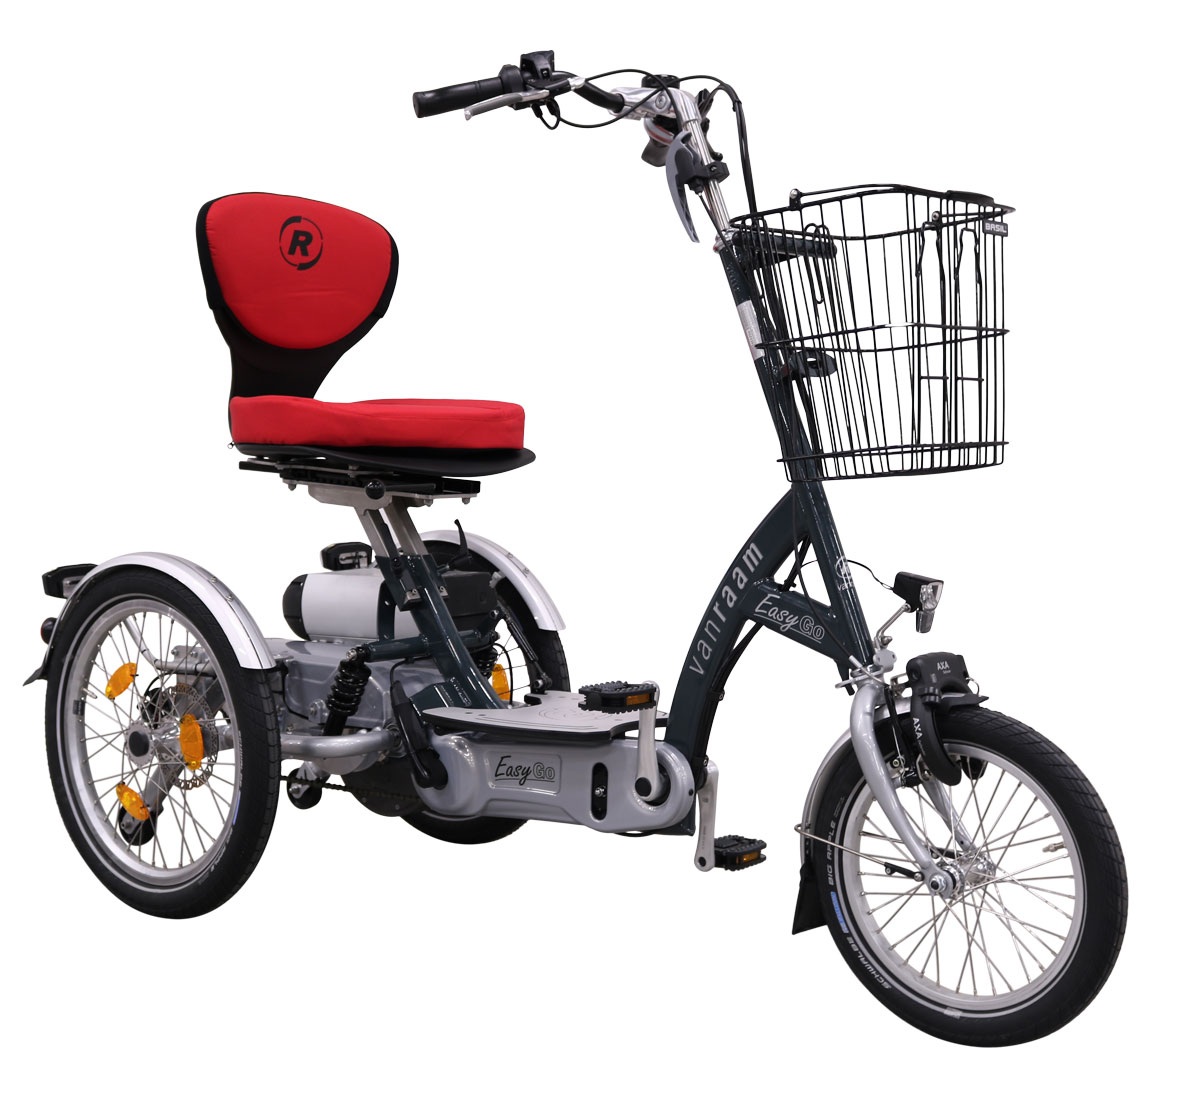 A Van Raam Easy Go Scooter bike on a white background. The bike has three wheels, enclosed chain drive, and a basket on the front.